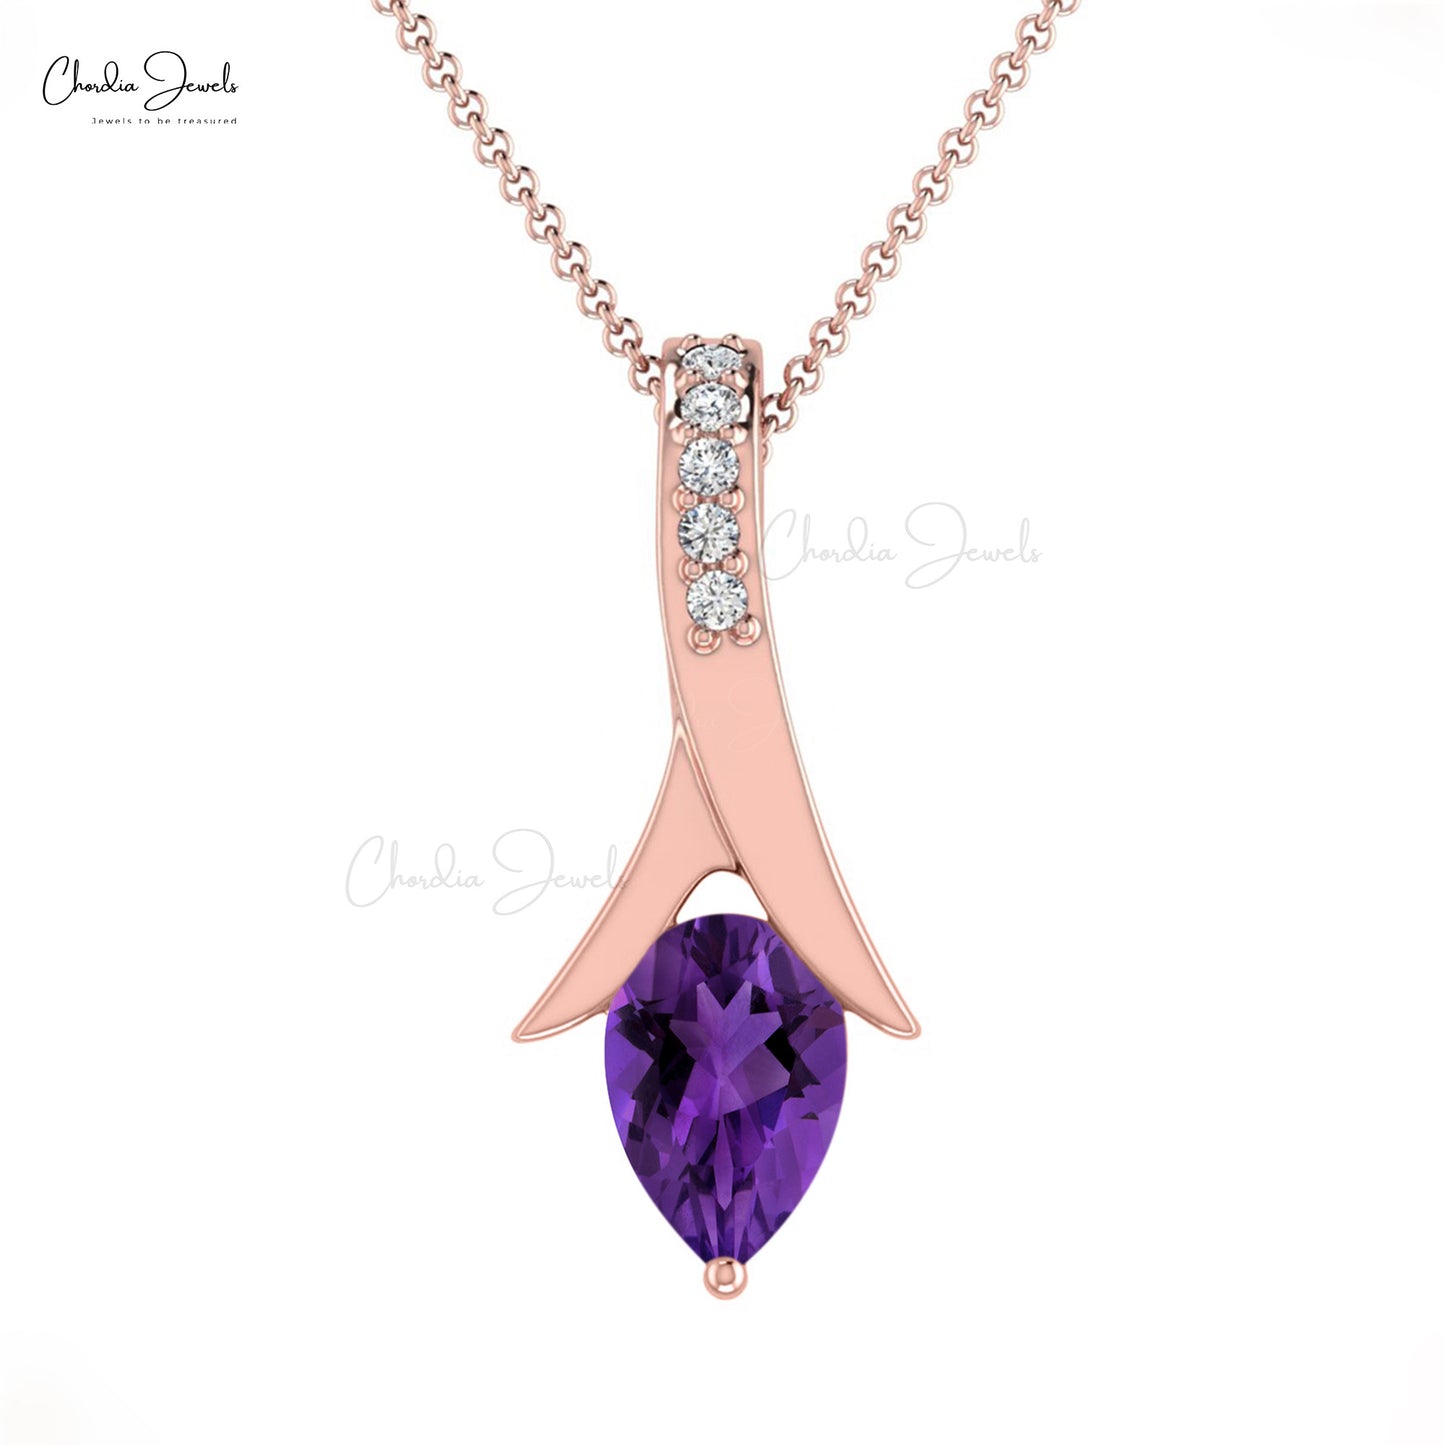 Natural Amethyst Tear Drop Pendant 14k Solid Gold White Diamond Pendant 6X4mm Pear Cut Gemstone Jewelry For Birthday Gift